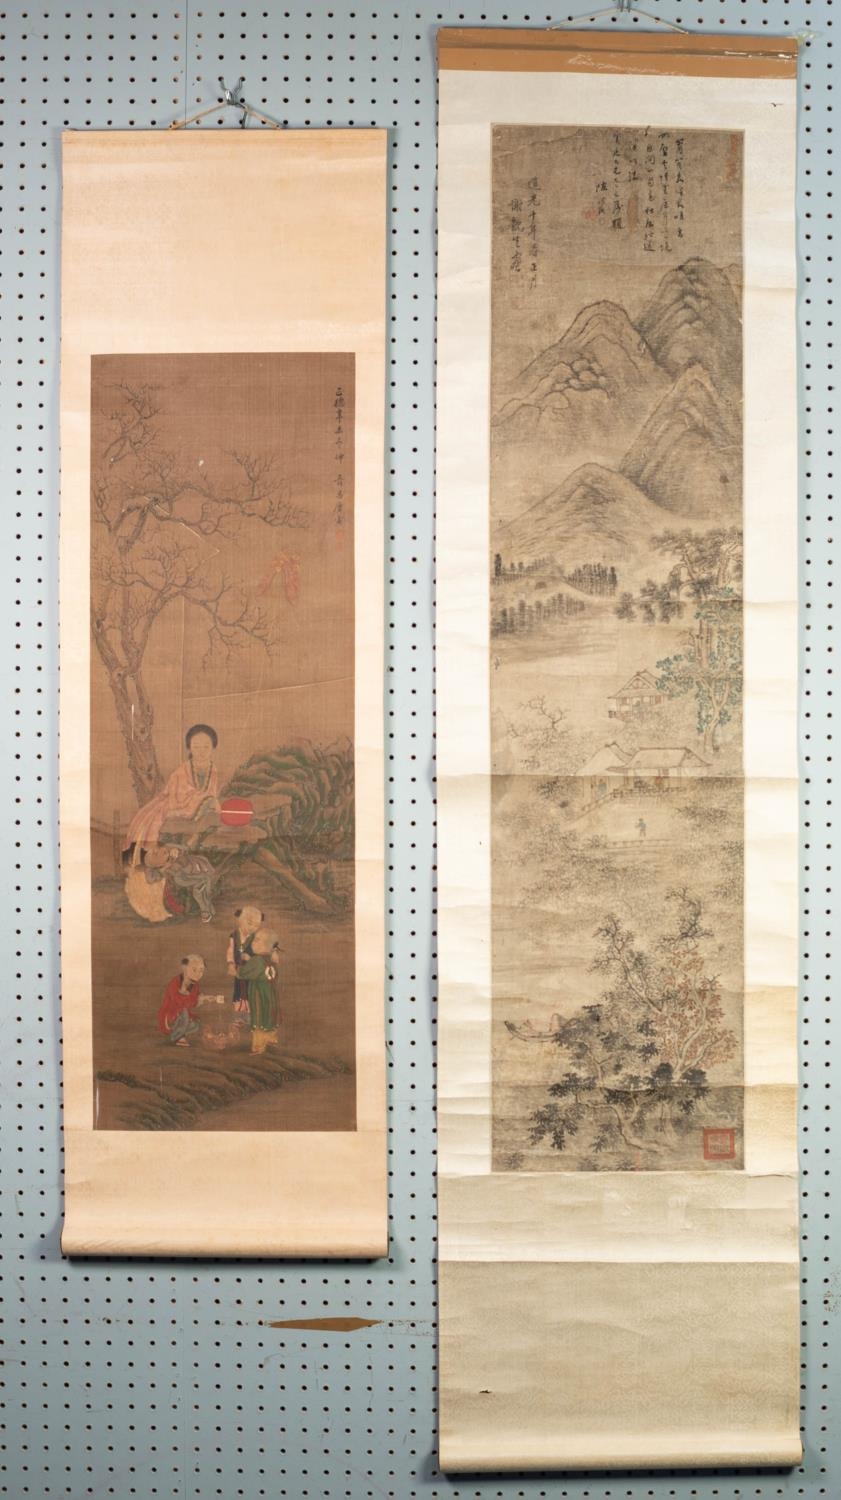 SIX CHINESE SMALL SCROLL PAINTINGS, mountainous river landscapes, figures at leisure, birds and